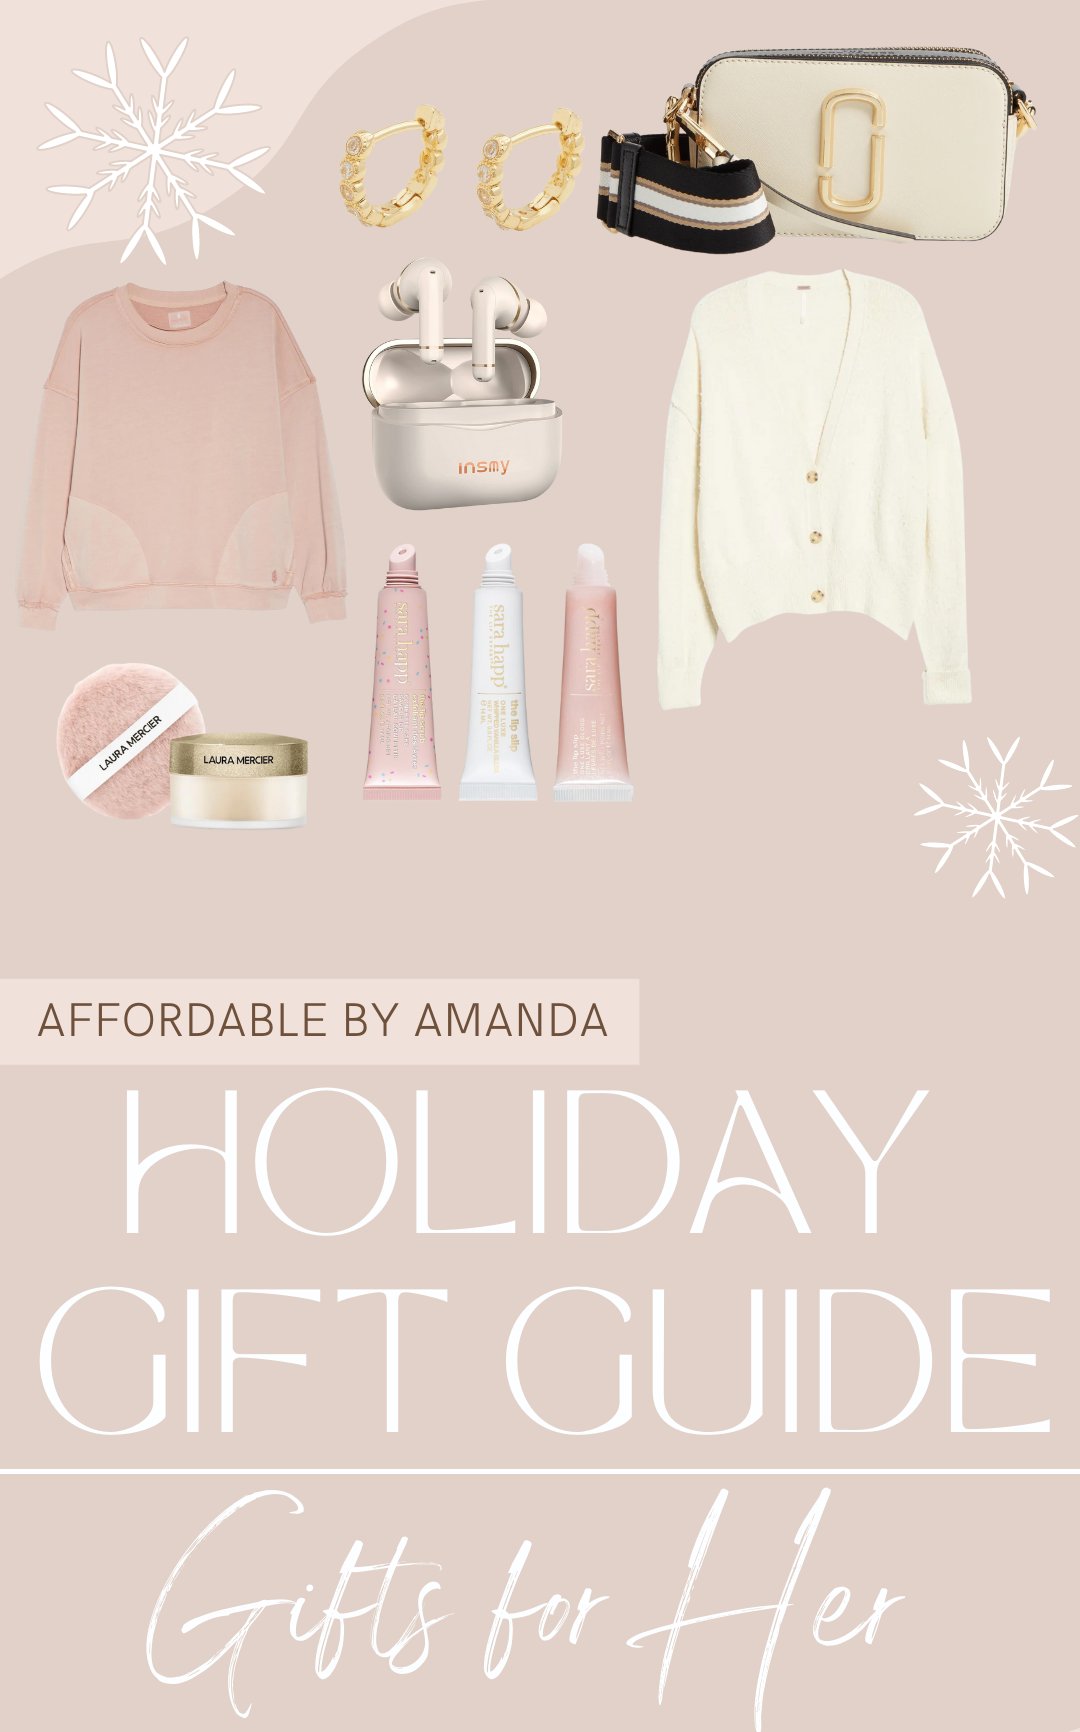 Holiday Gift Guide: Gifts for Her - Affordable by Amanda